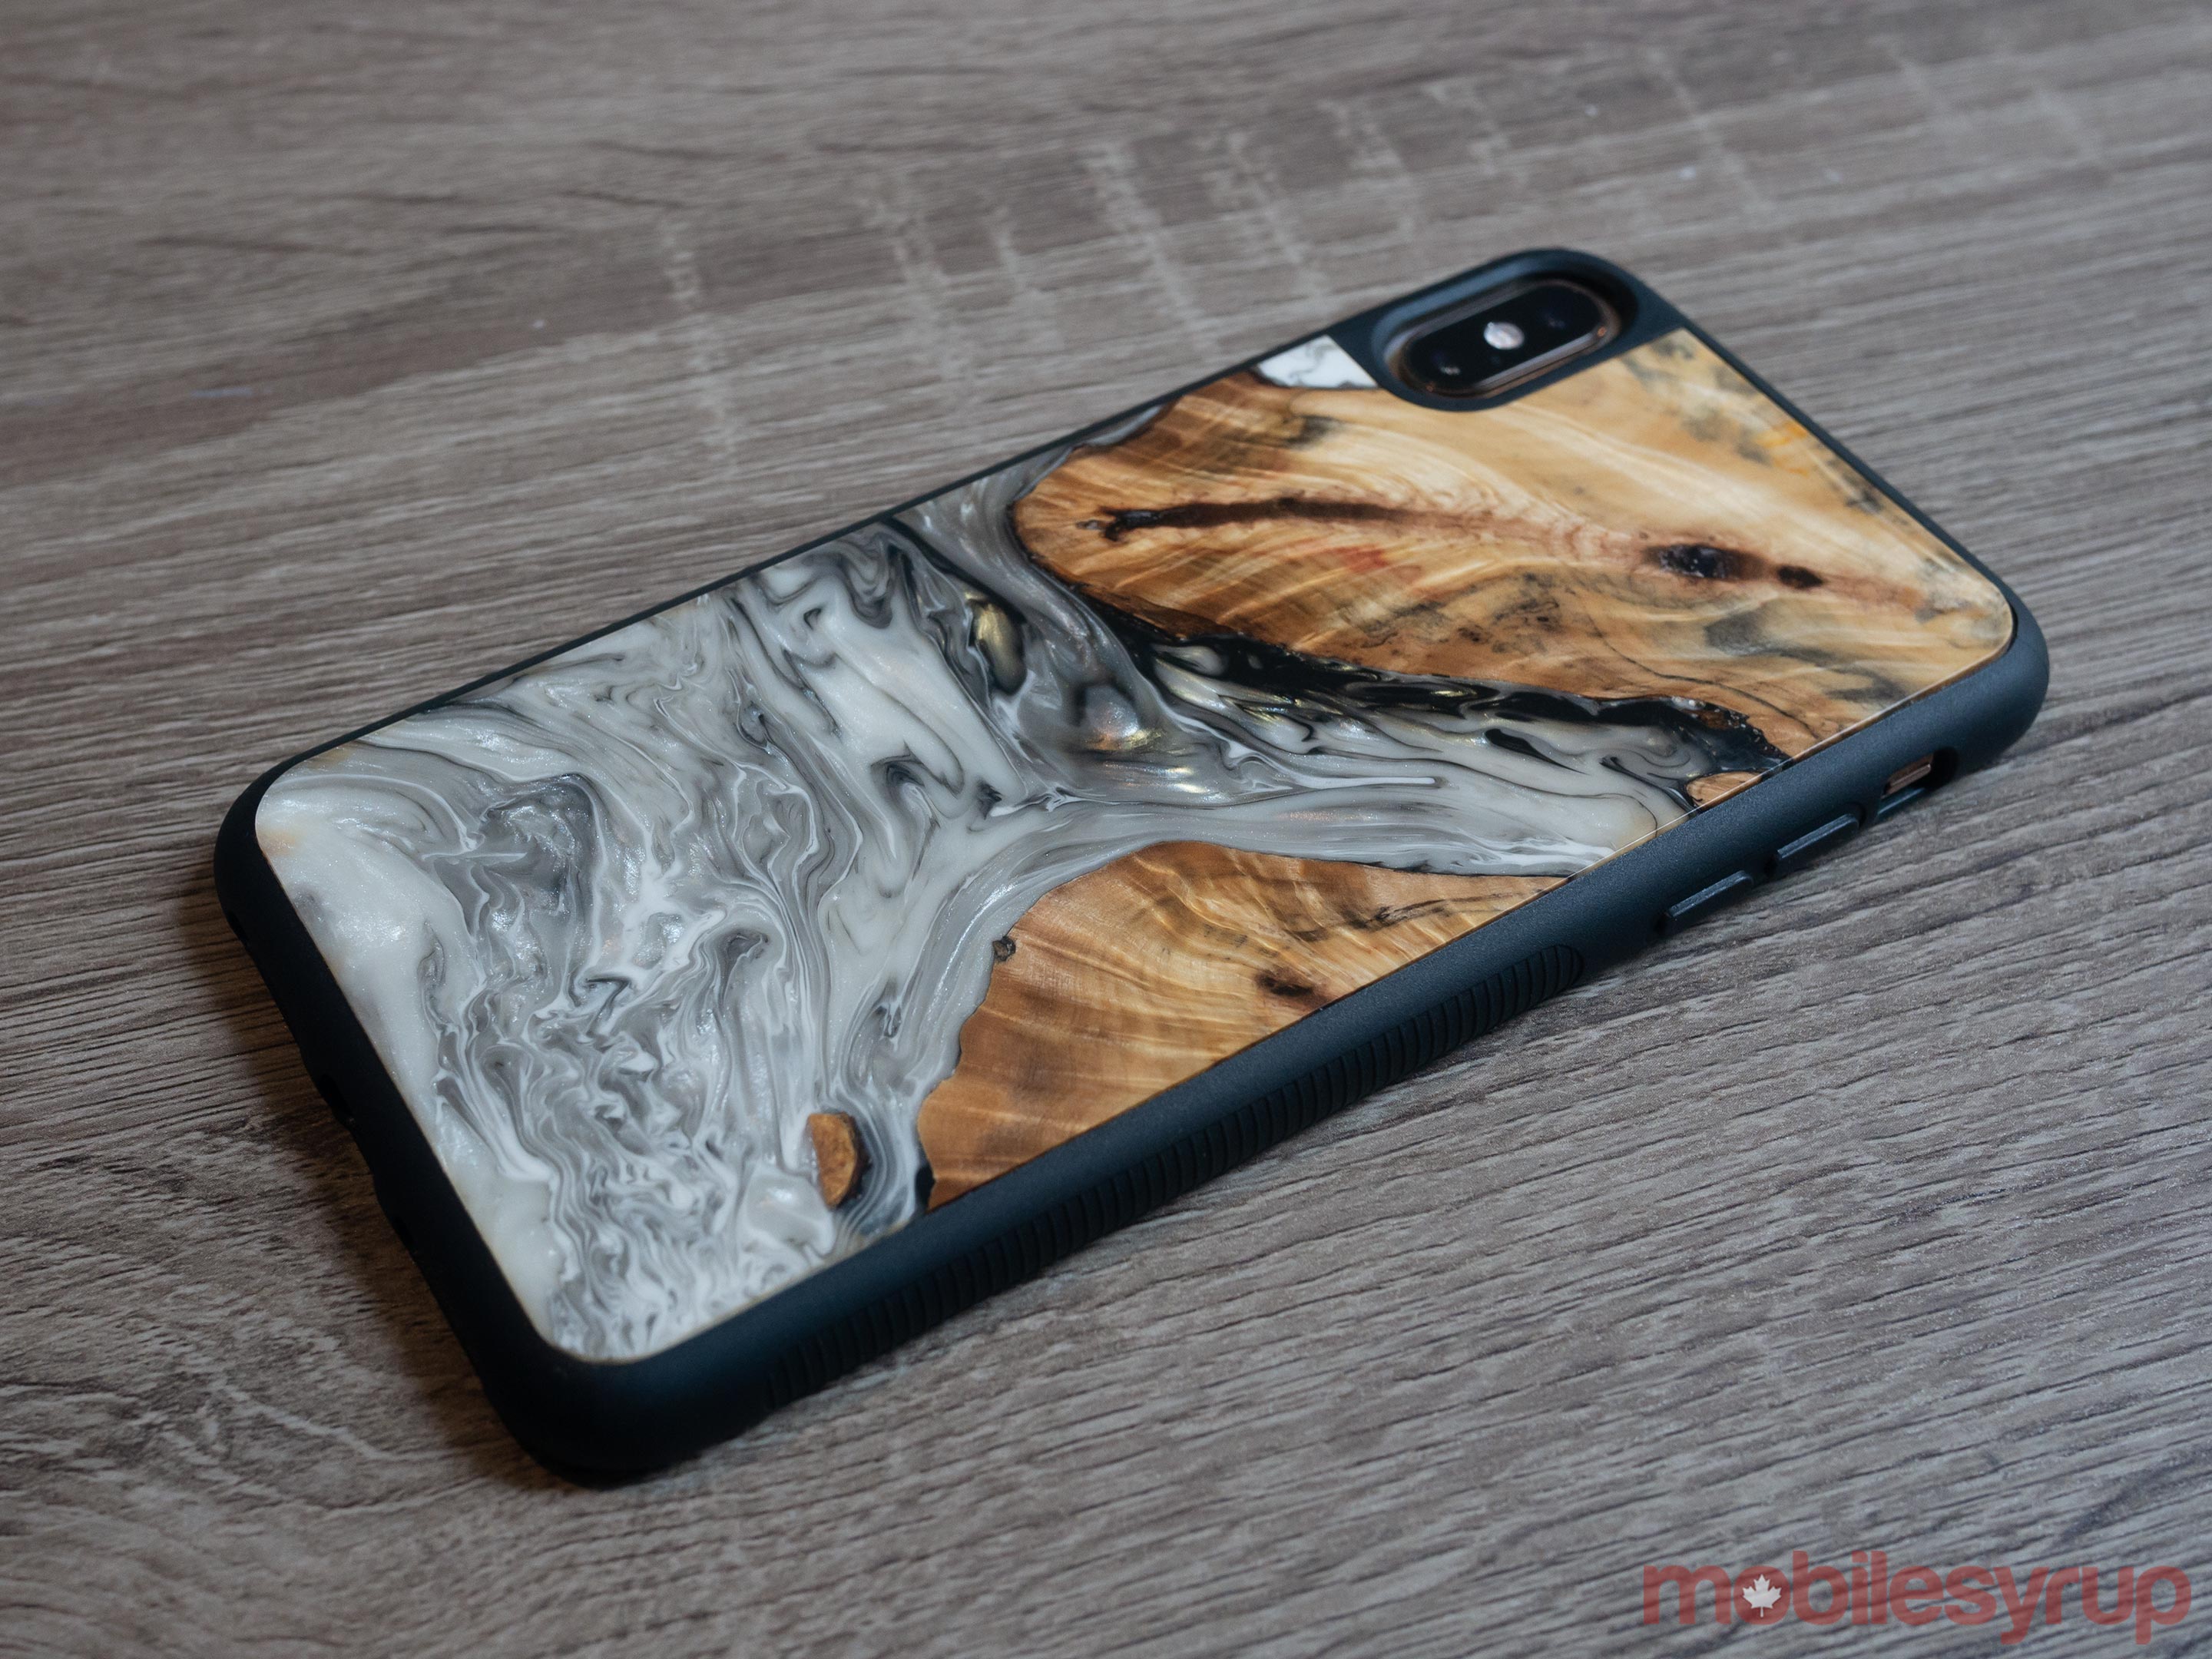 Carved smartphone case side view